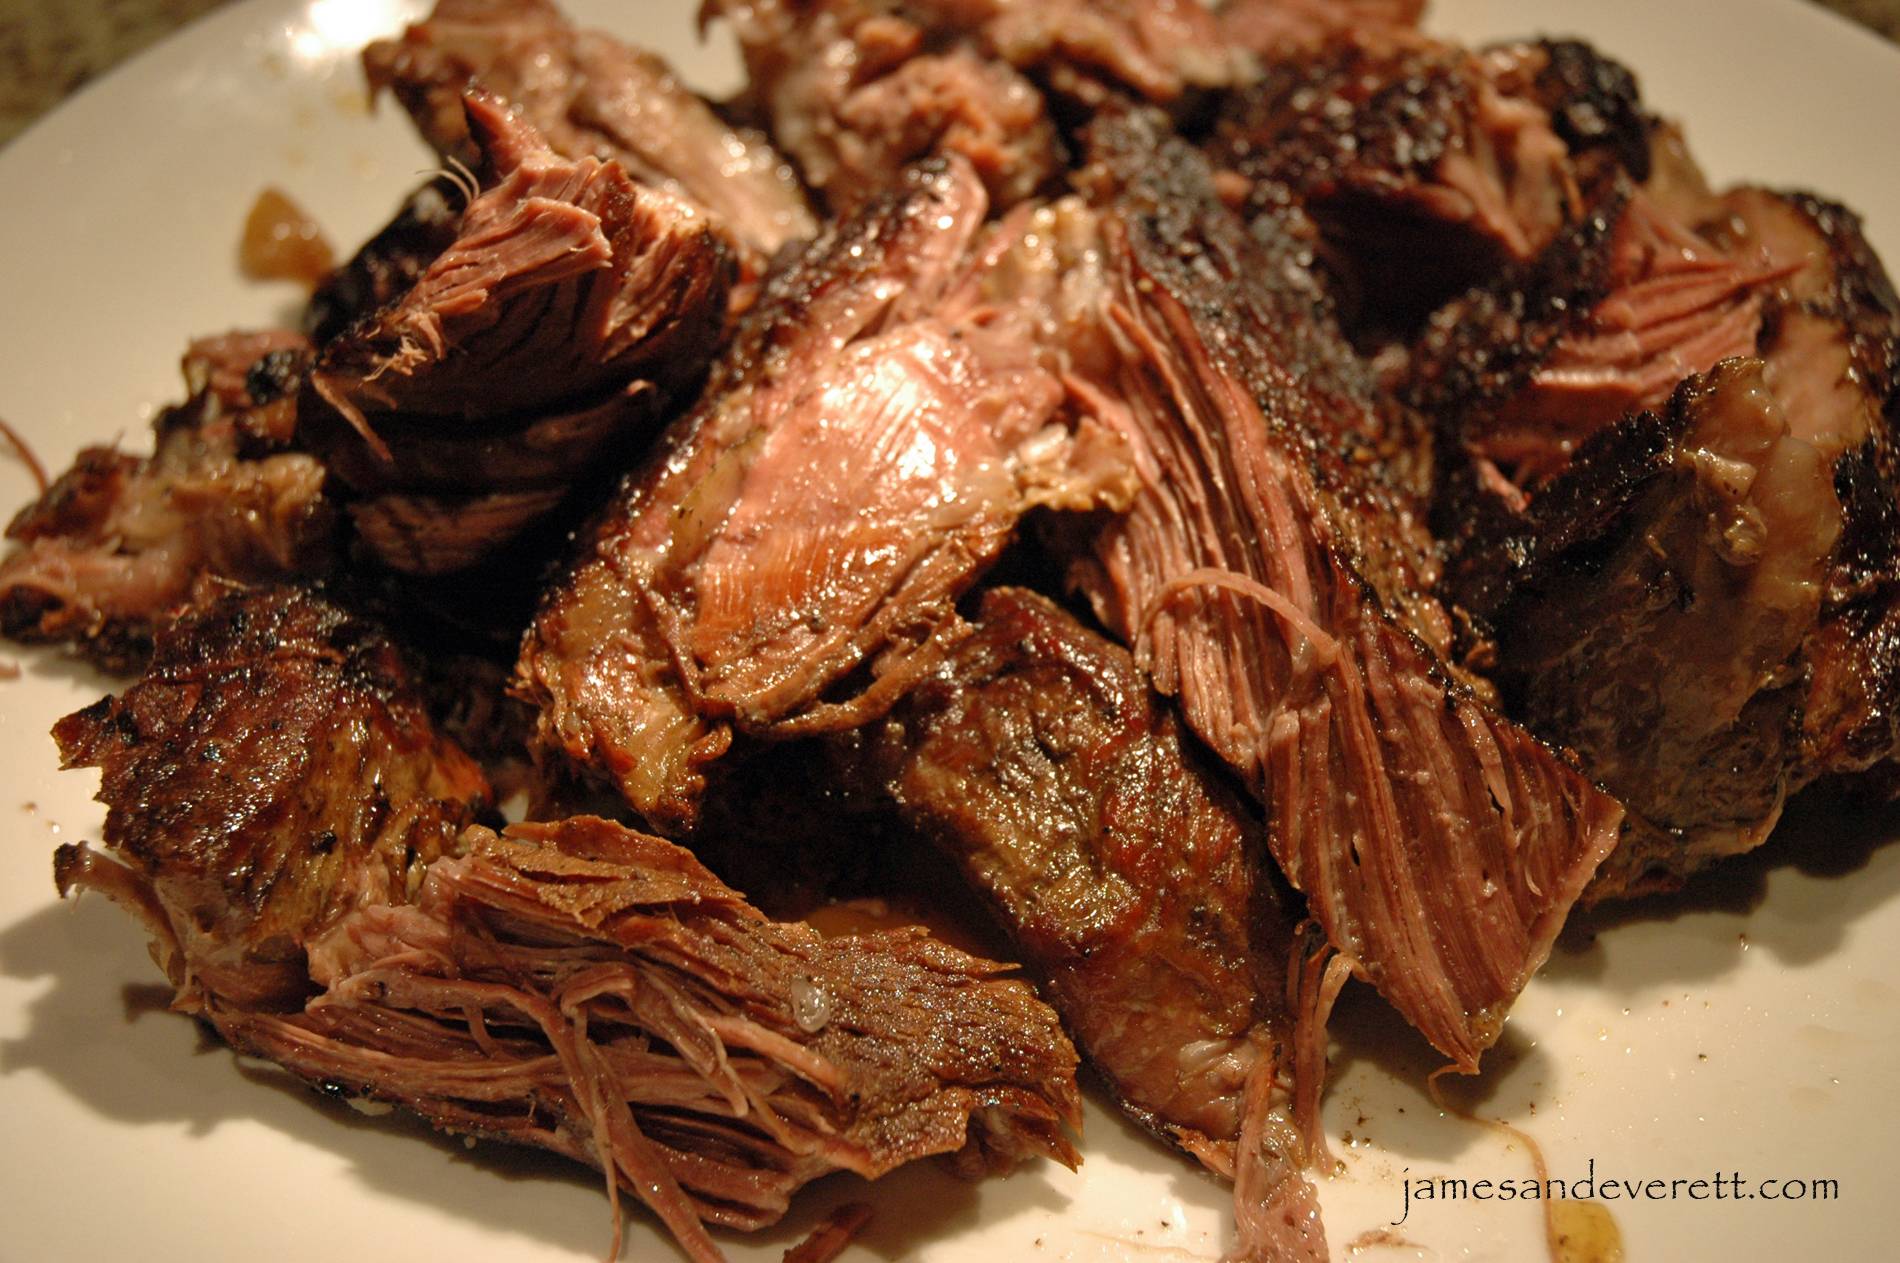 What is a recipe using chuck roast cooked in the oven?